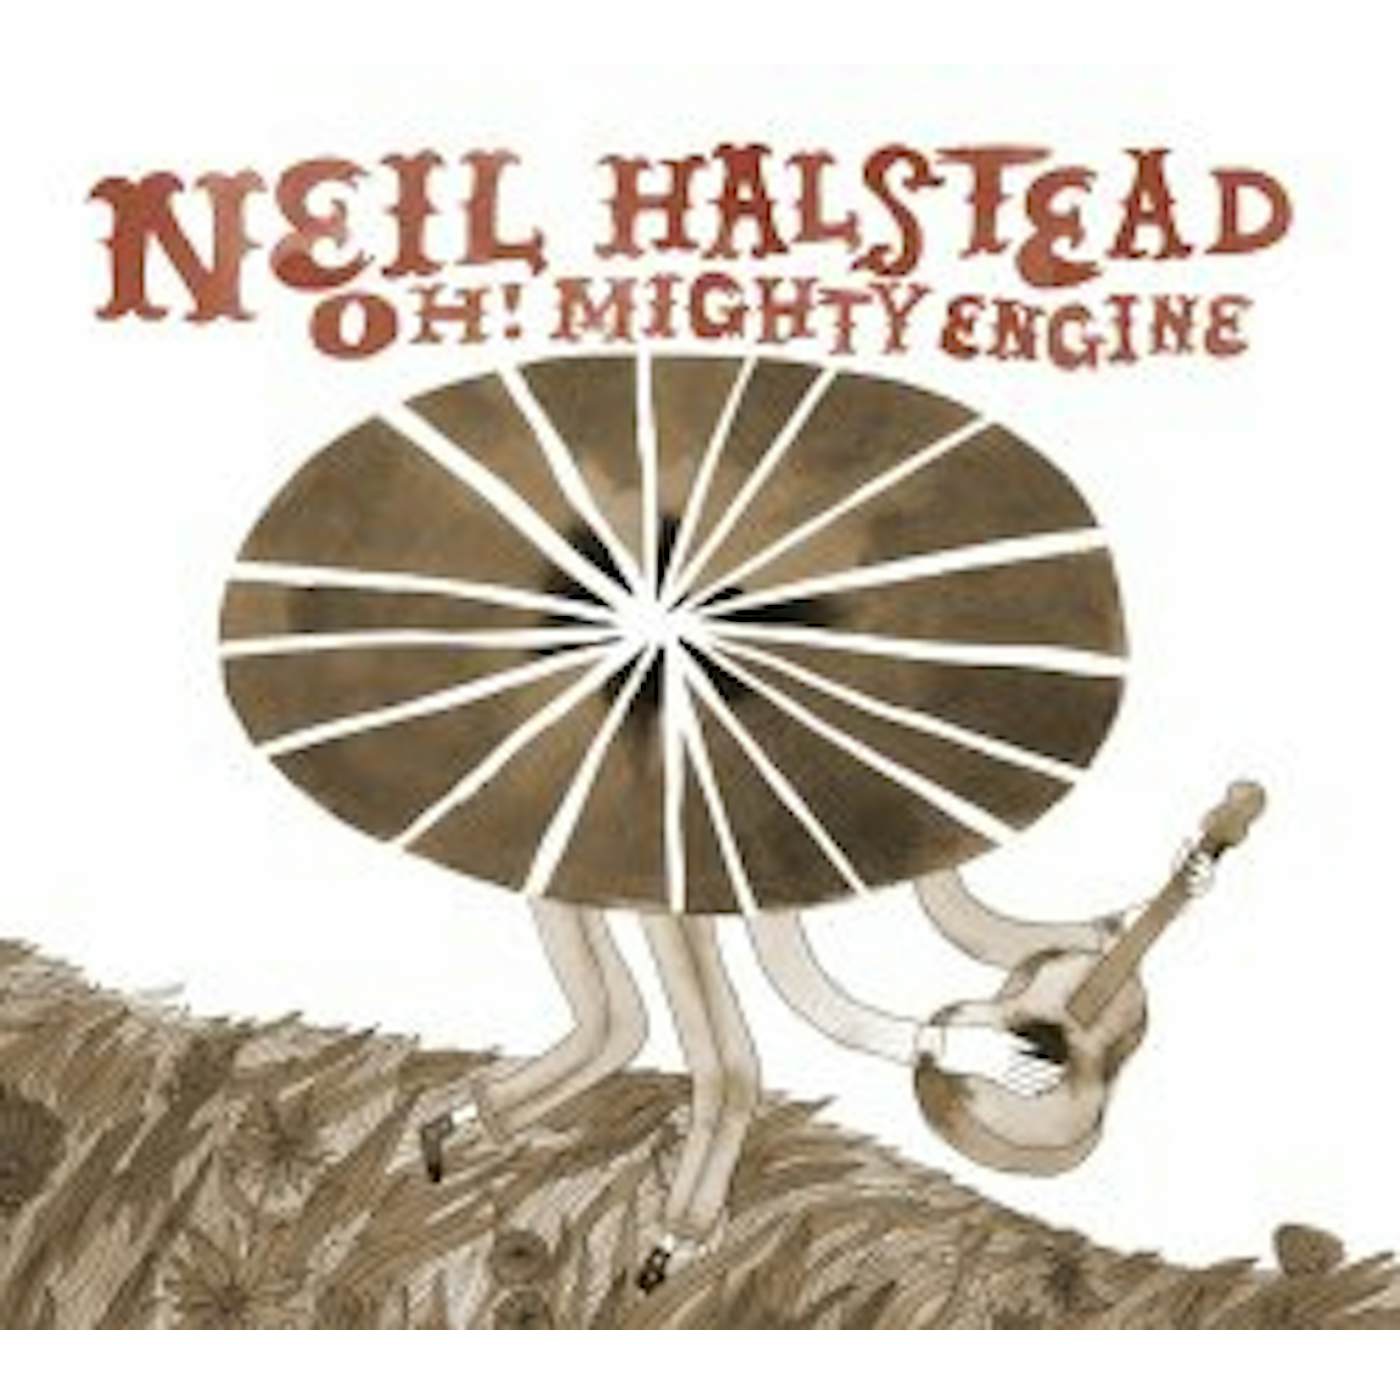 Neil Halstead OH MIGHTY ENGINE CD